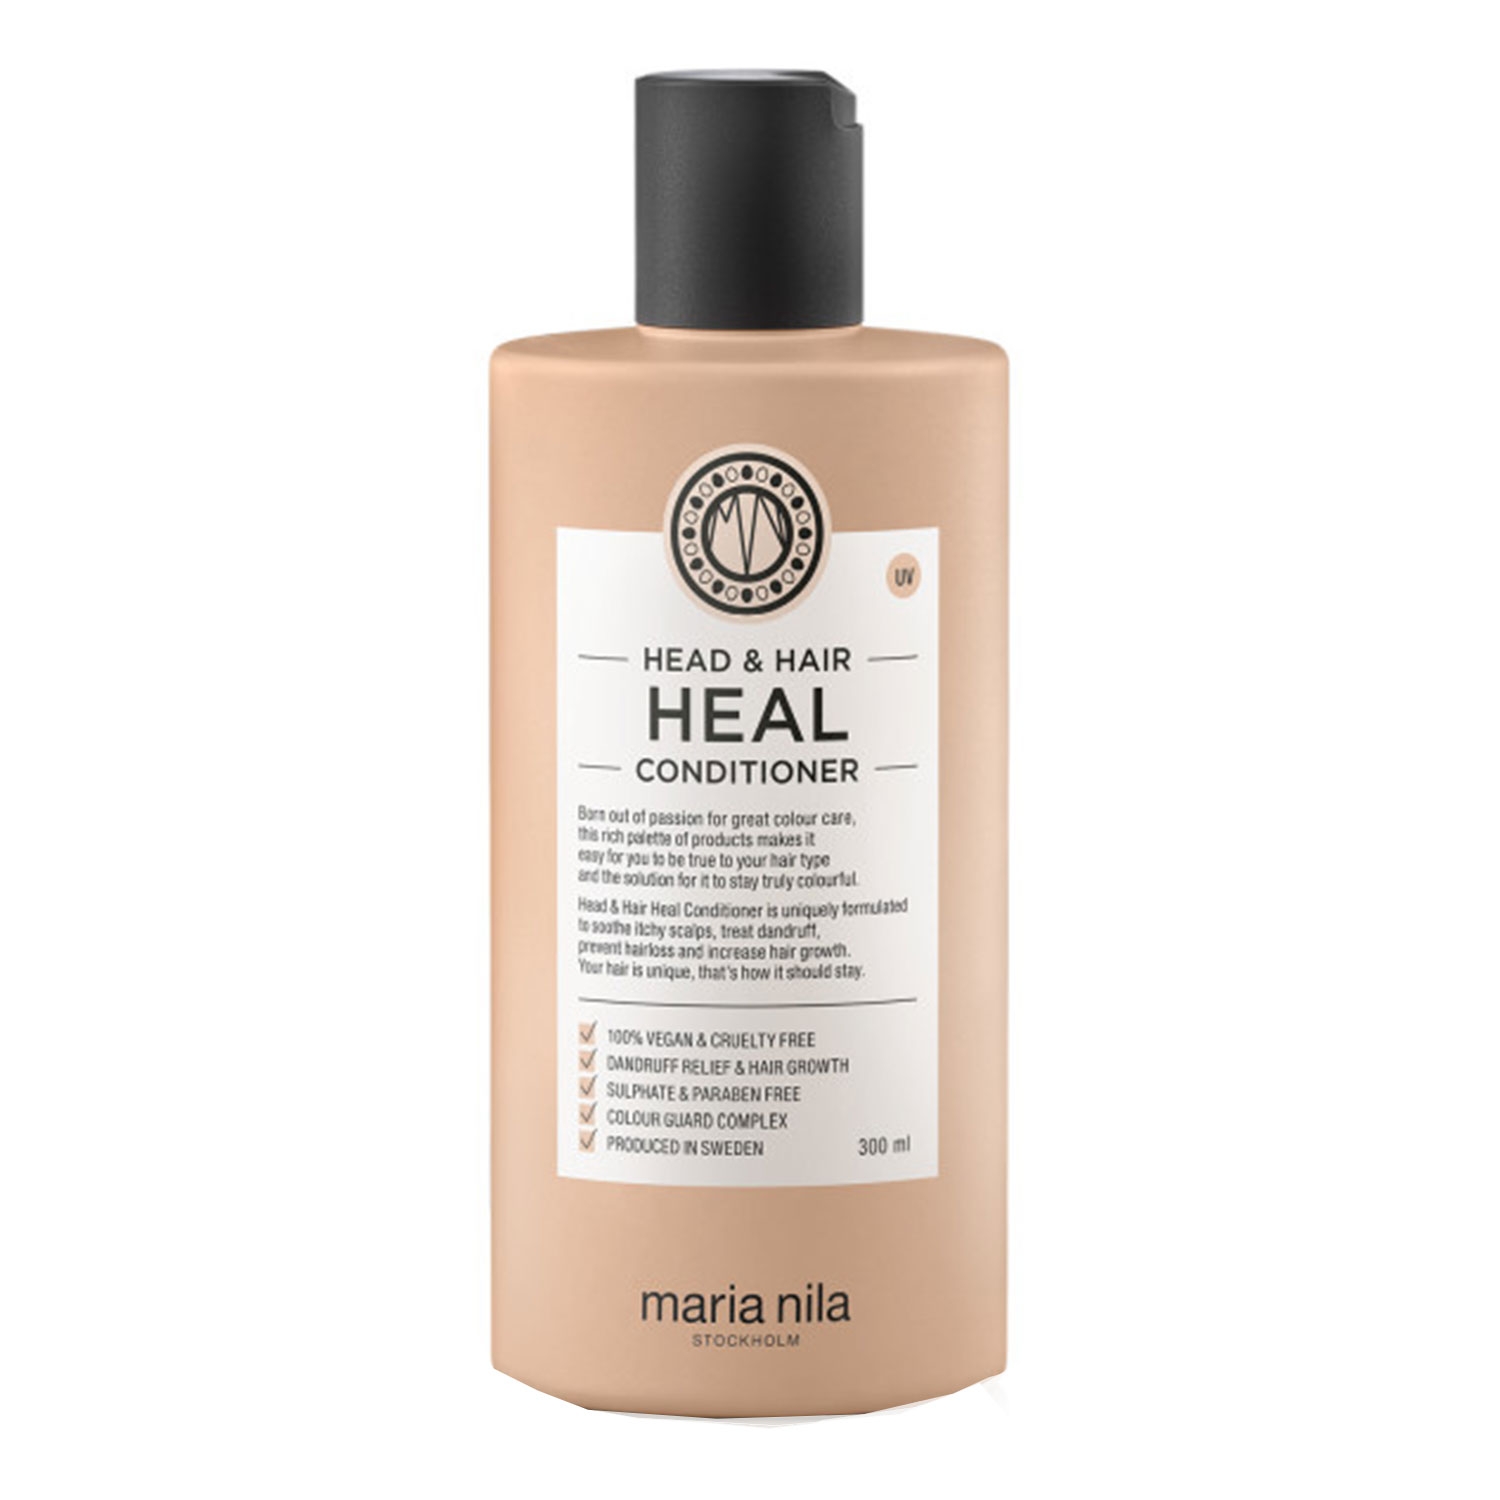 Product image from Care & Style - Head & Hair Heal Conditioner